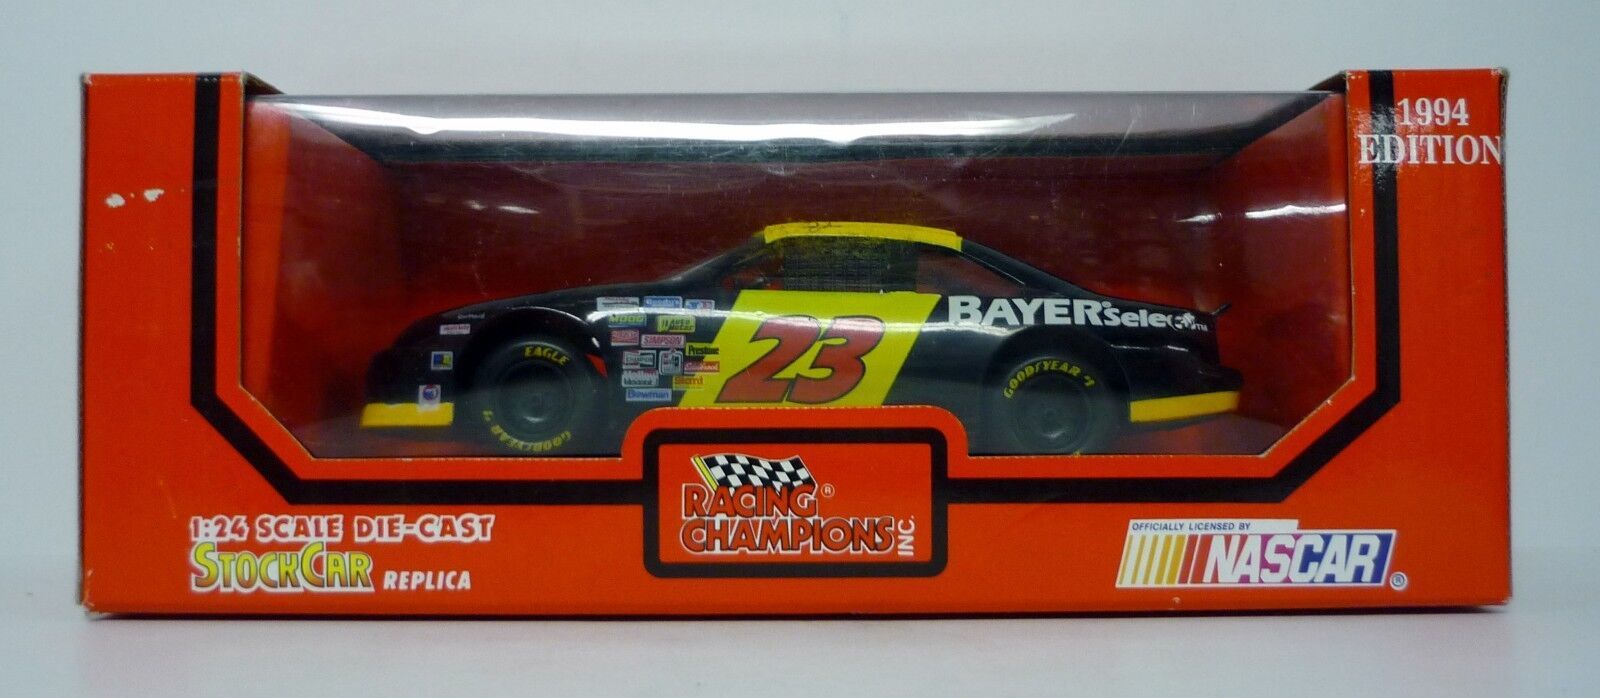 Primary image for Racing Champions Chad Little #23 NASCAR Bayer 1:24 Black Die-Cast Car 1994